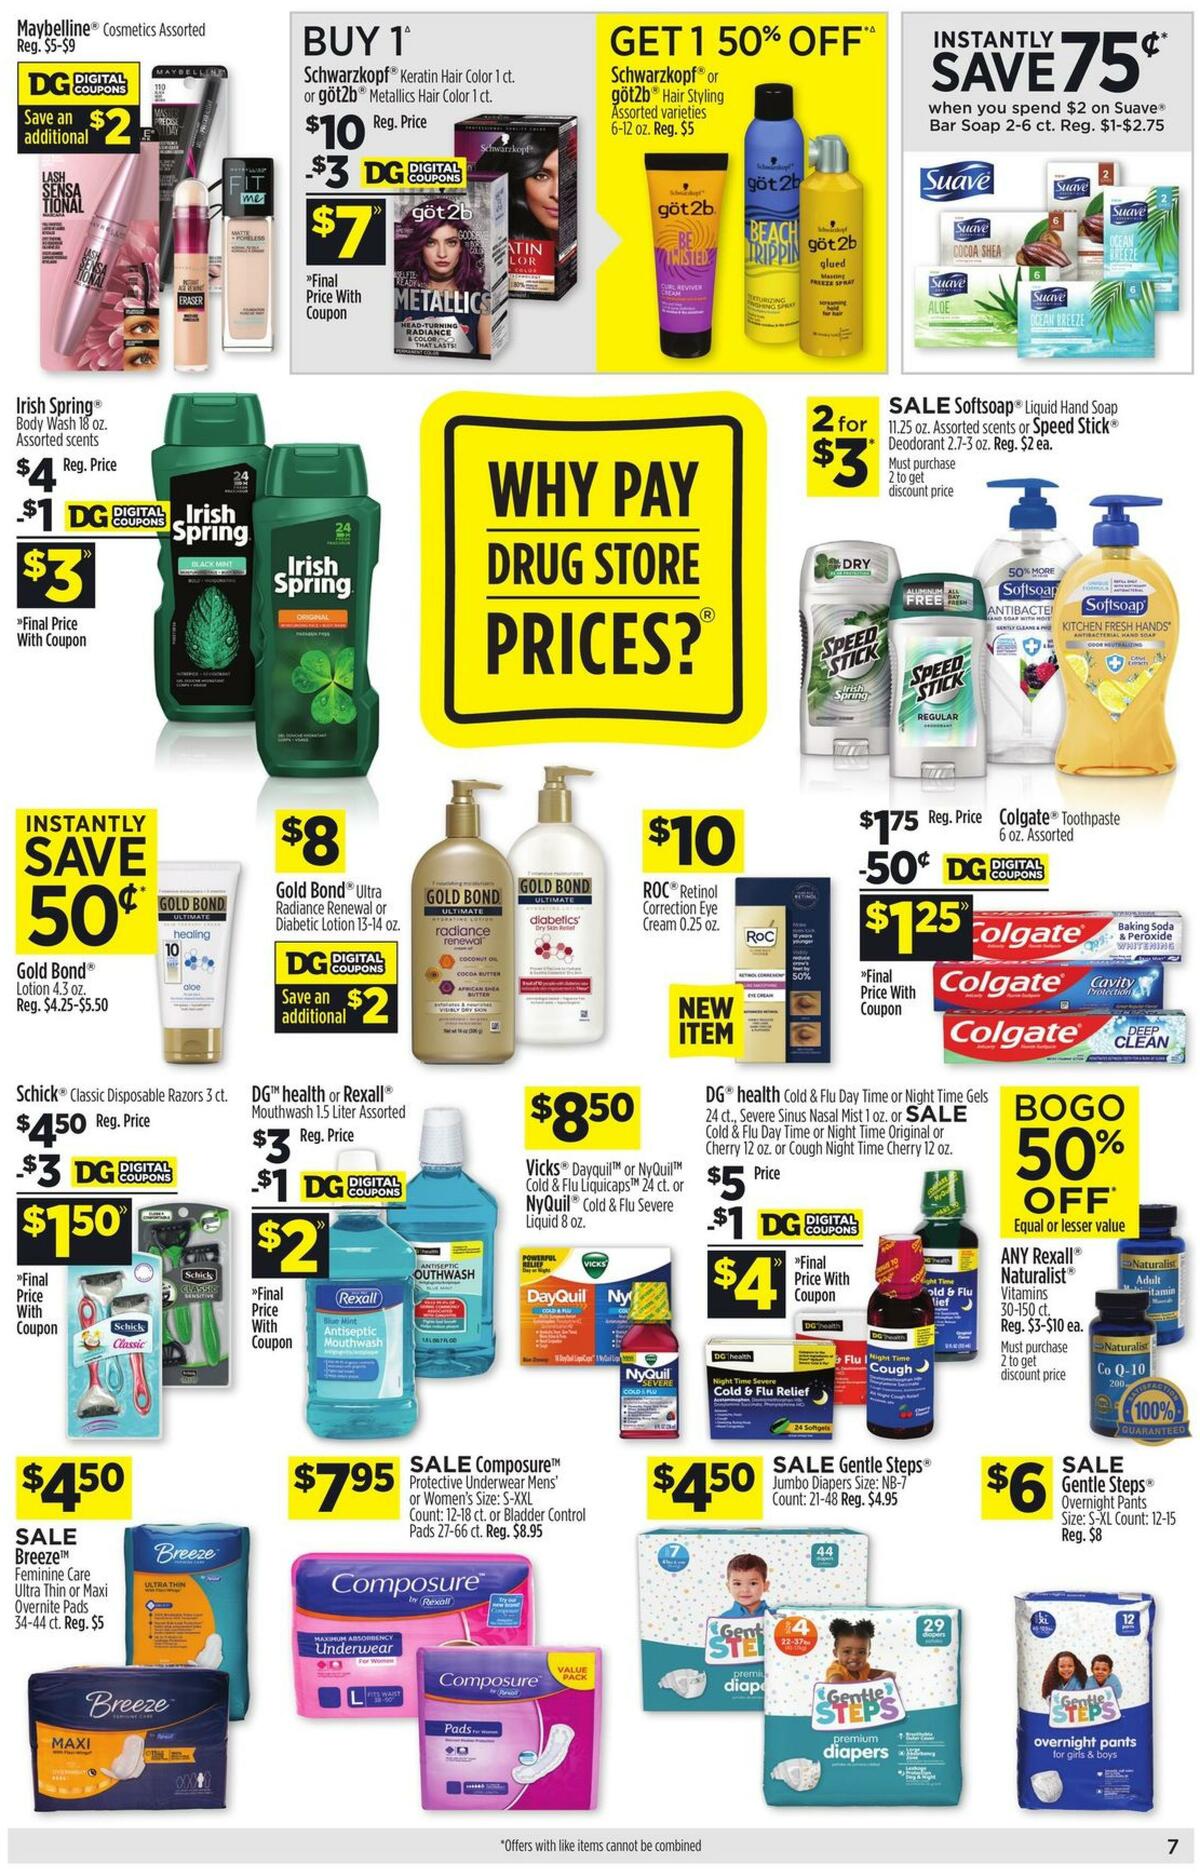 Dollar General Weekly Ad from October 17